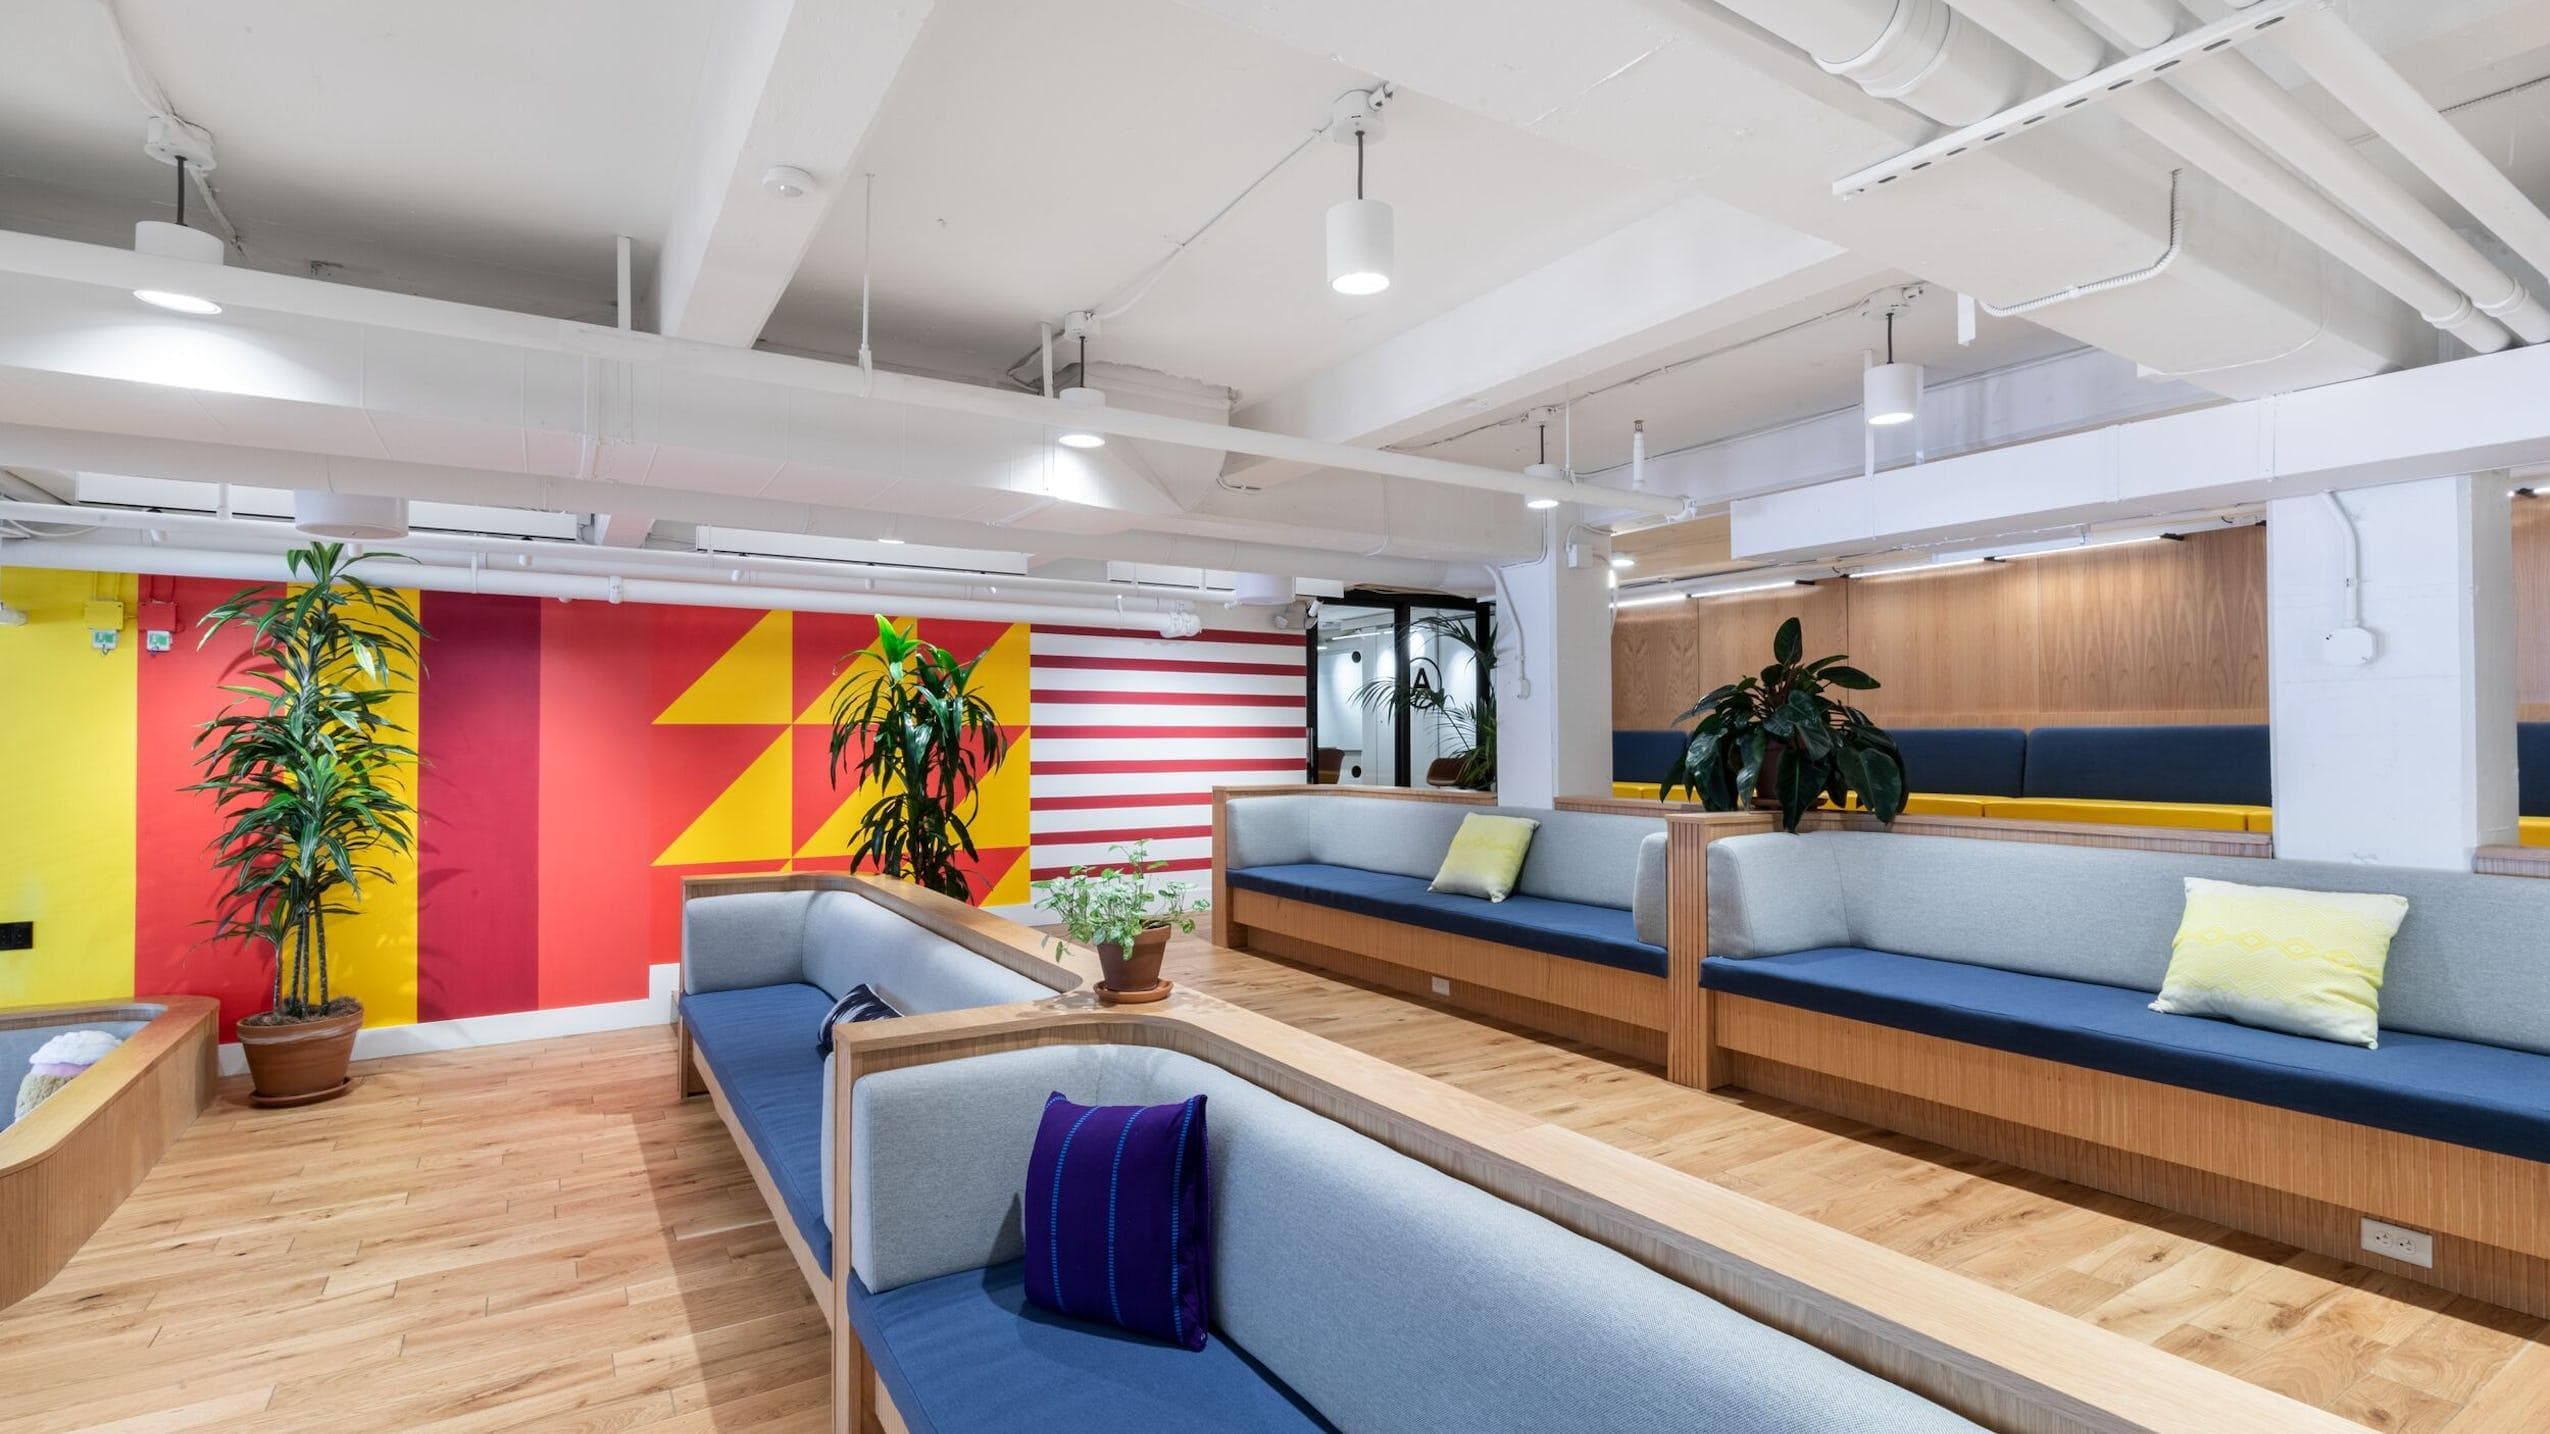 WeWork Space mezzanine aria: Long bench style couches with soft pillows, and wood furnishings.